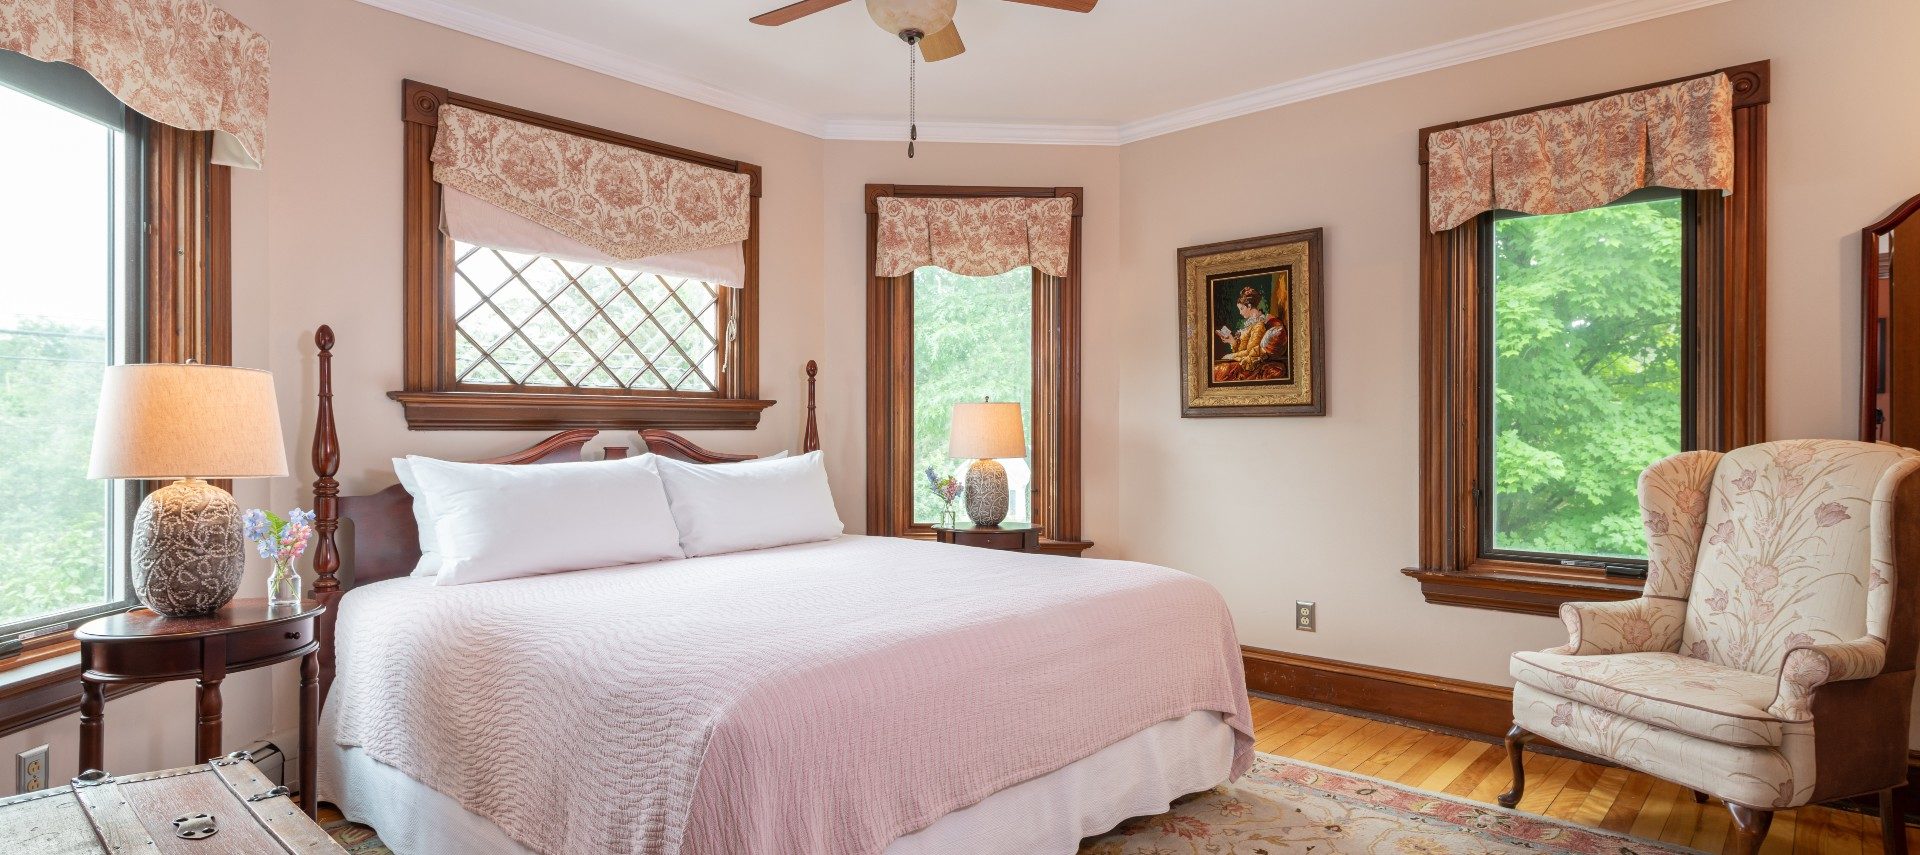 Elegant bedroom with king bed, wingback sitting chair. and four bright windows with floral valences